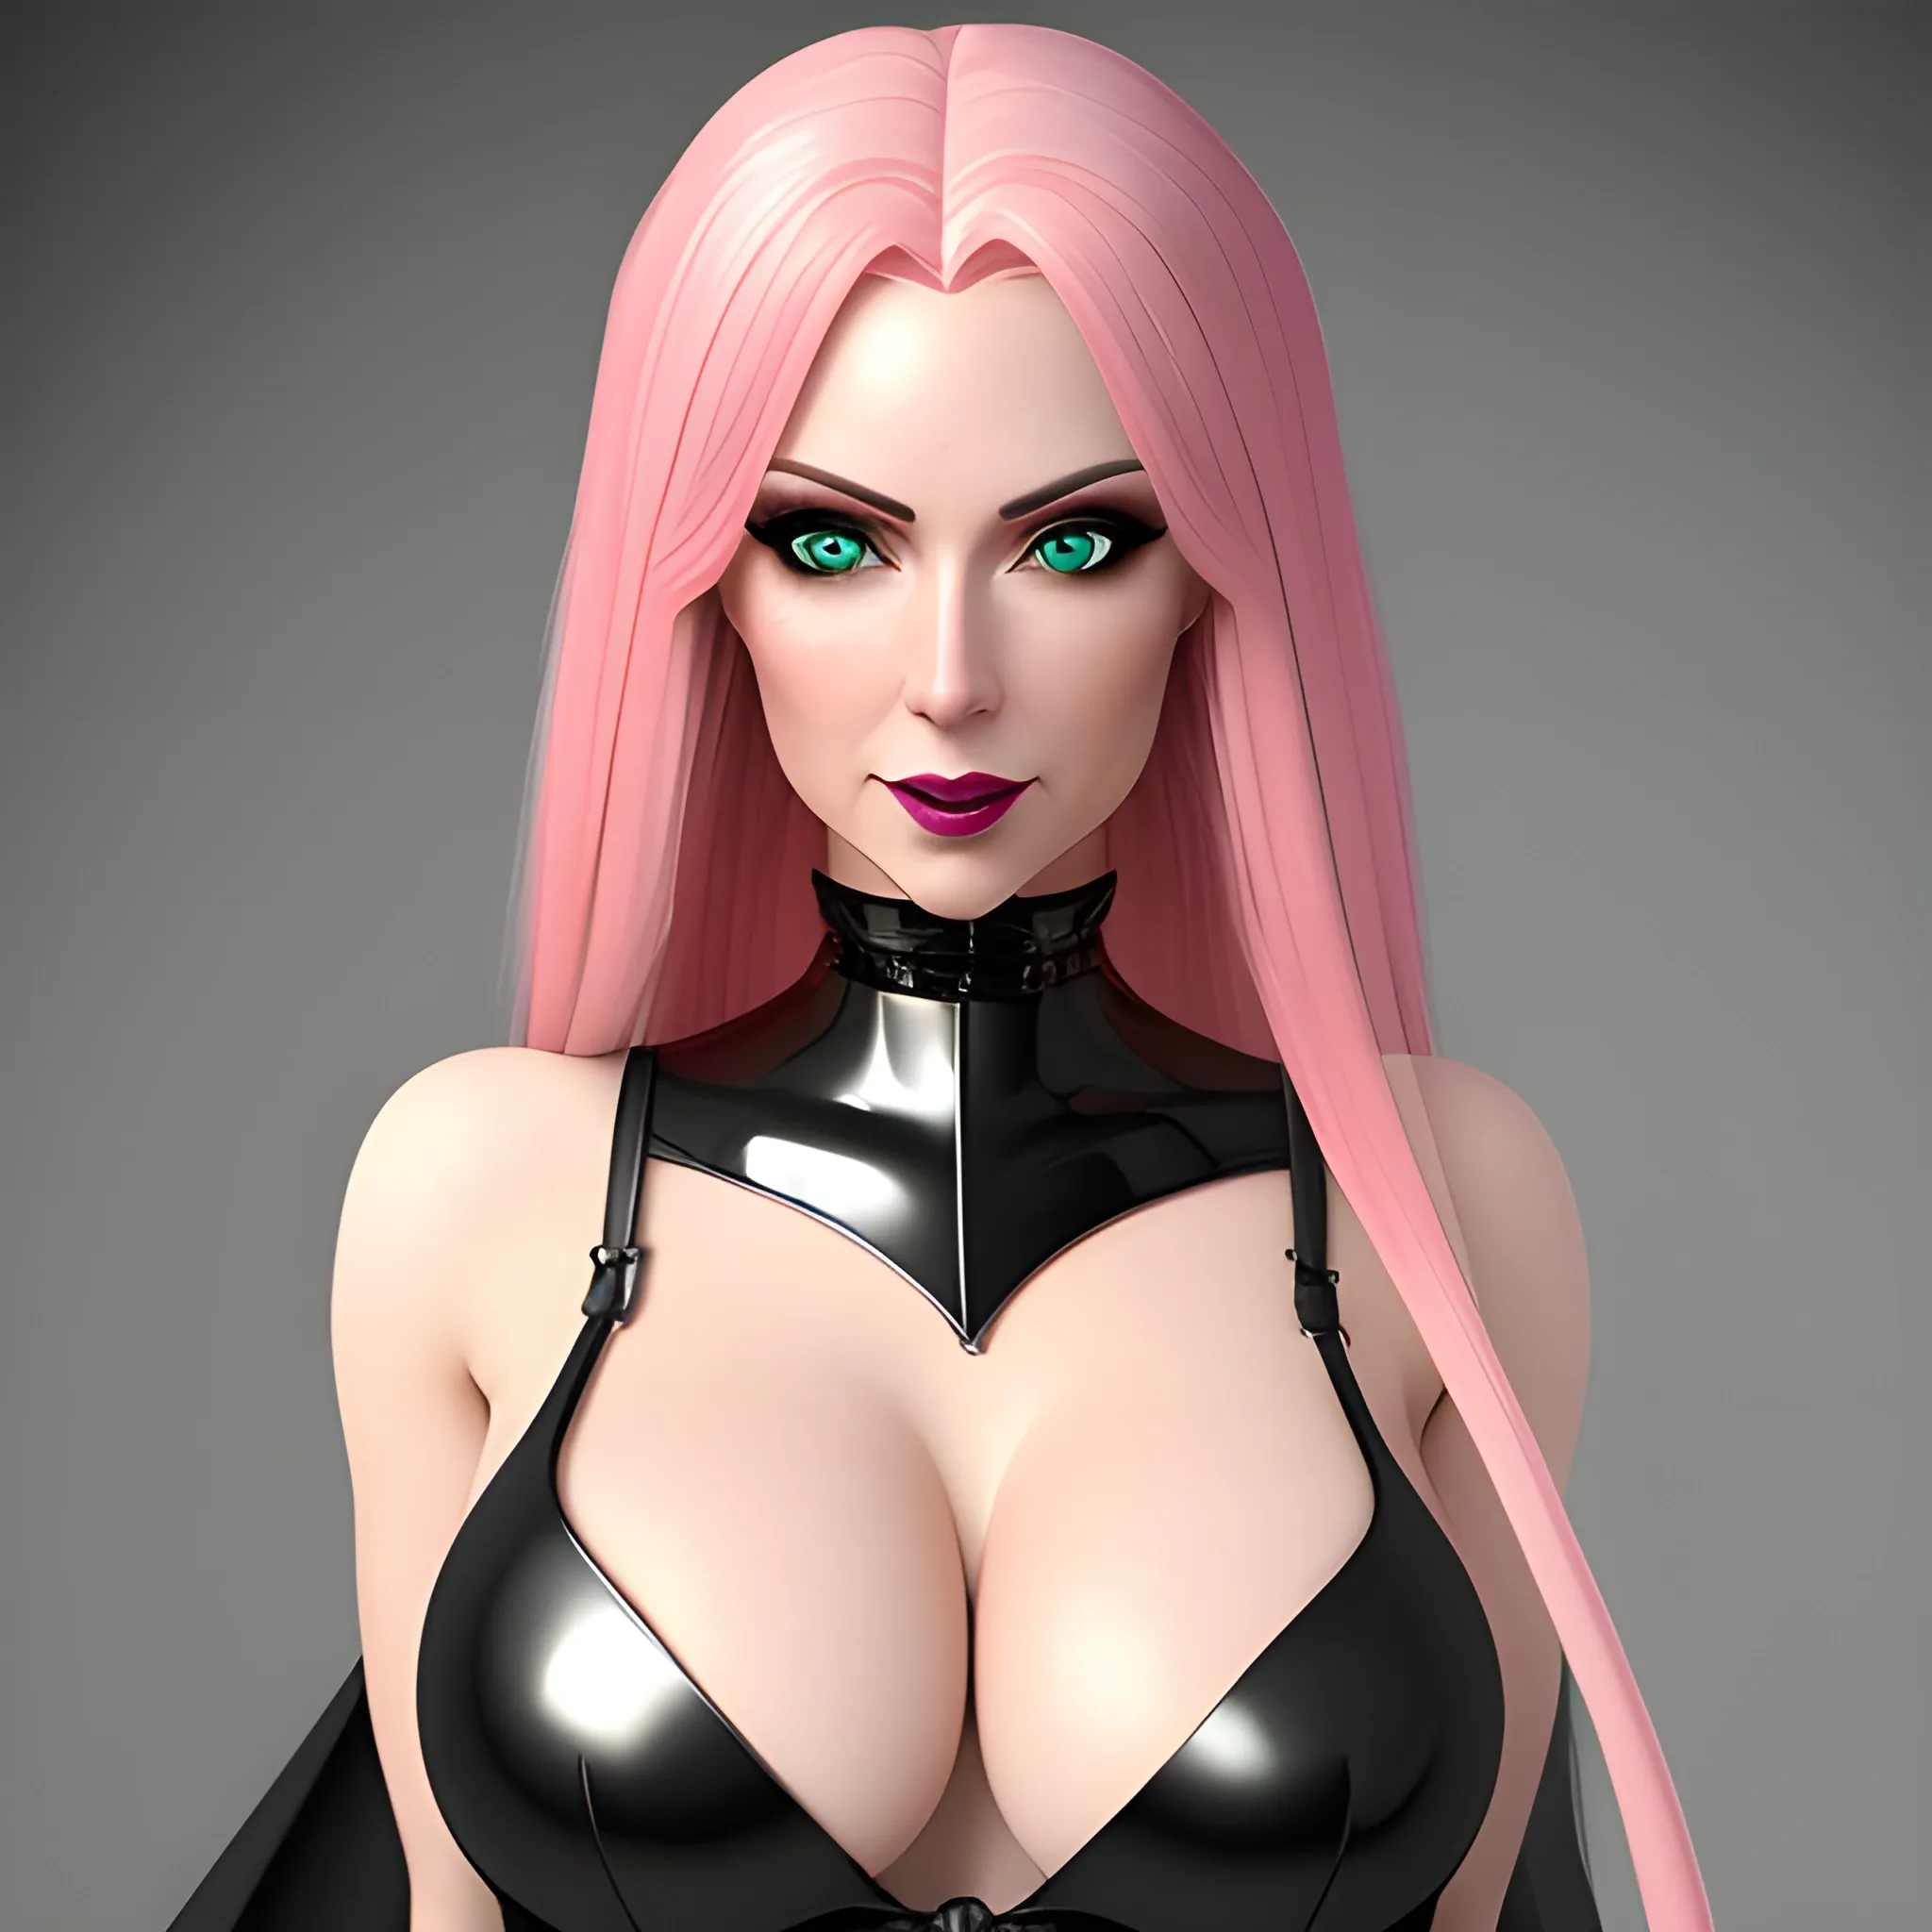 Create a photorealistic image of a cute young woman with long pink hair and light green eyes, she has small breasts, she wears a shiny dark medieval dress in latex and leather, breasts visible, pretty eyes, sweet mouth, whole body visible, highest level of detail